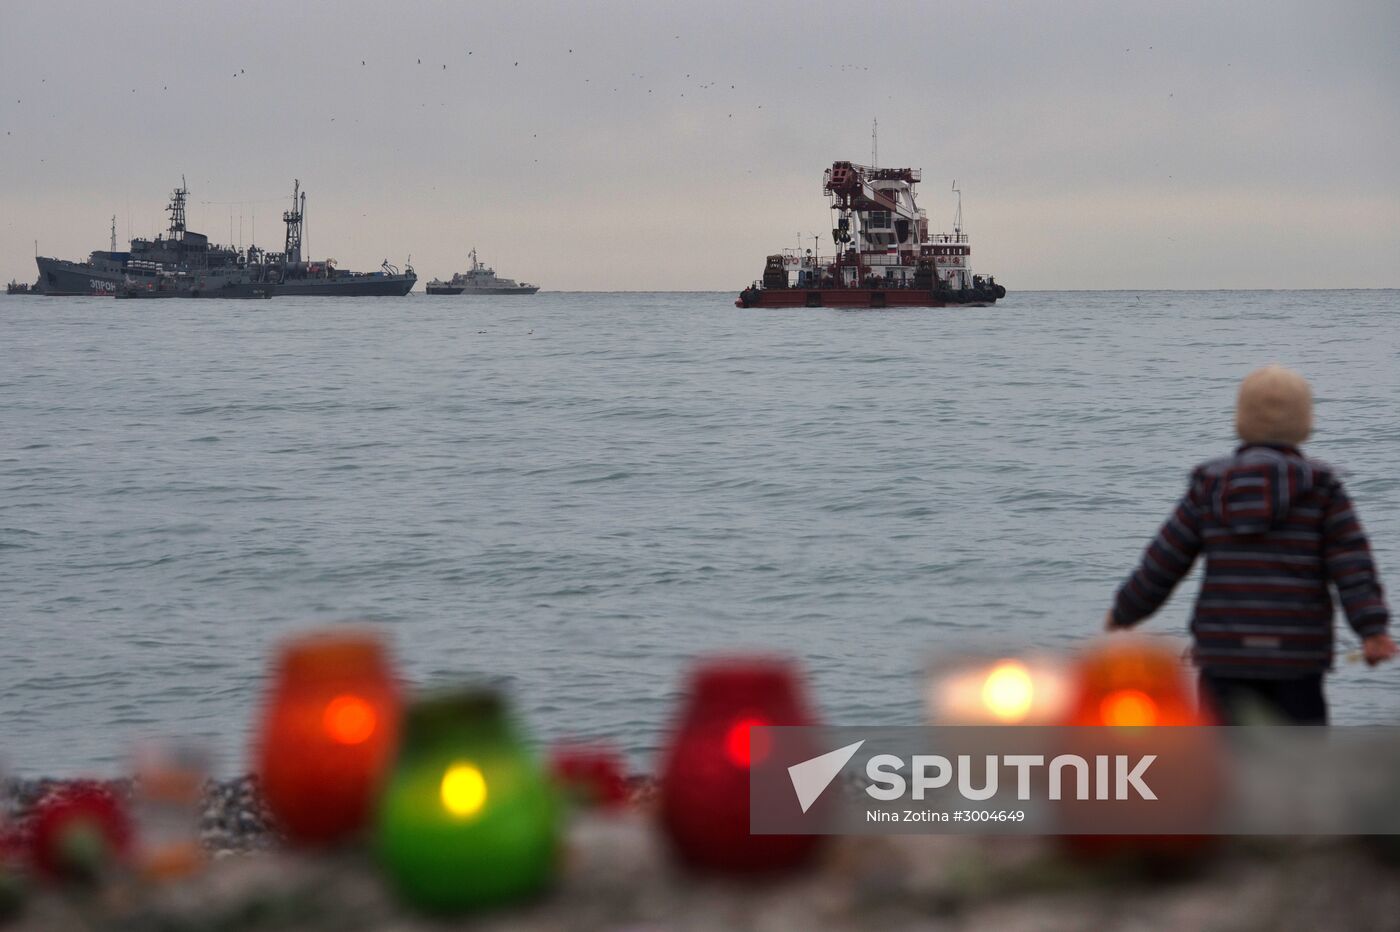 Search works in waters of Black Sea at crash site of Tu-124